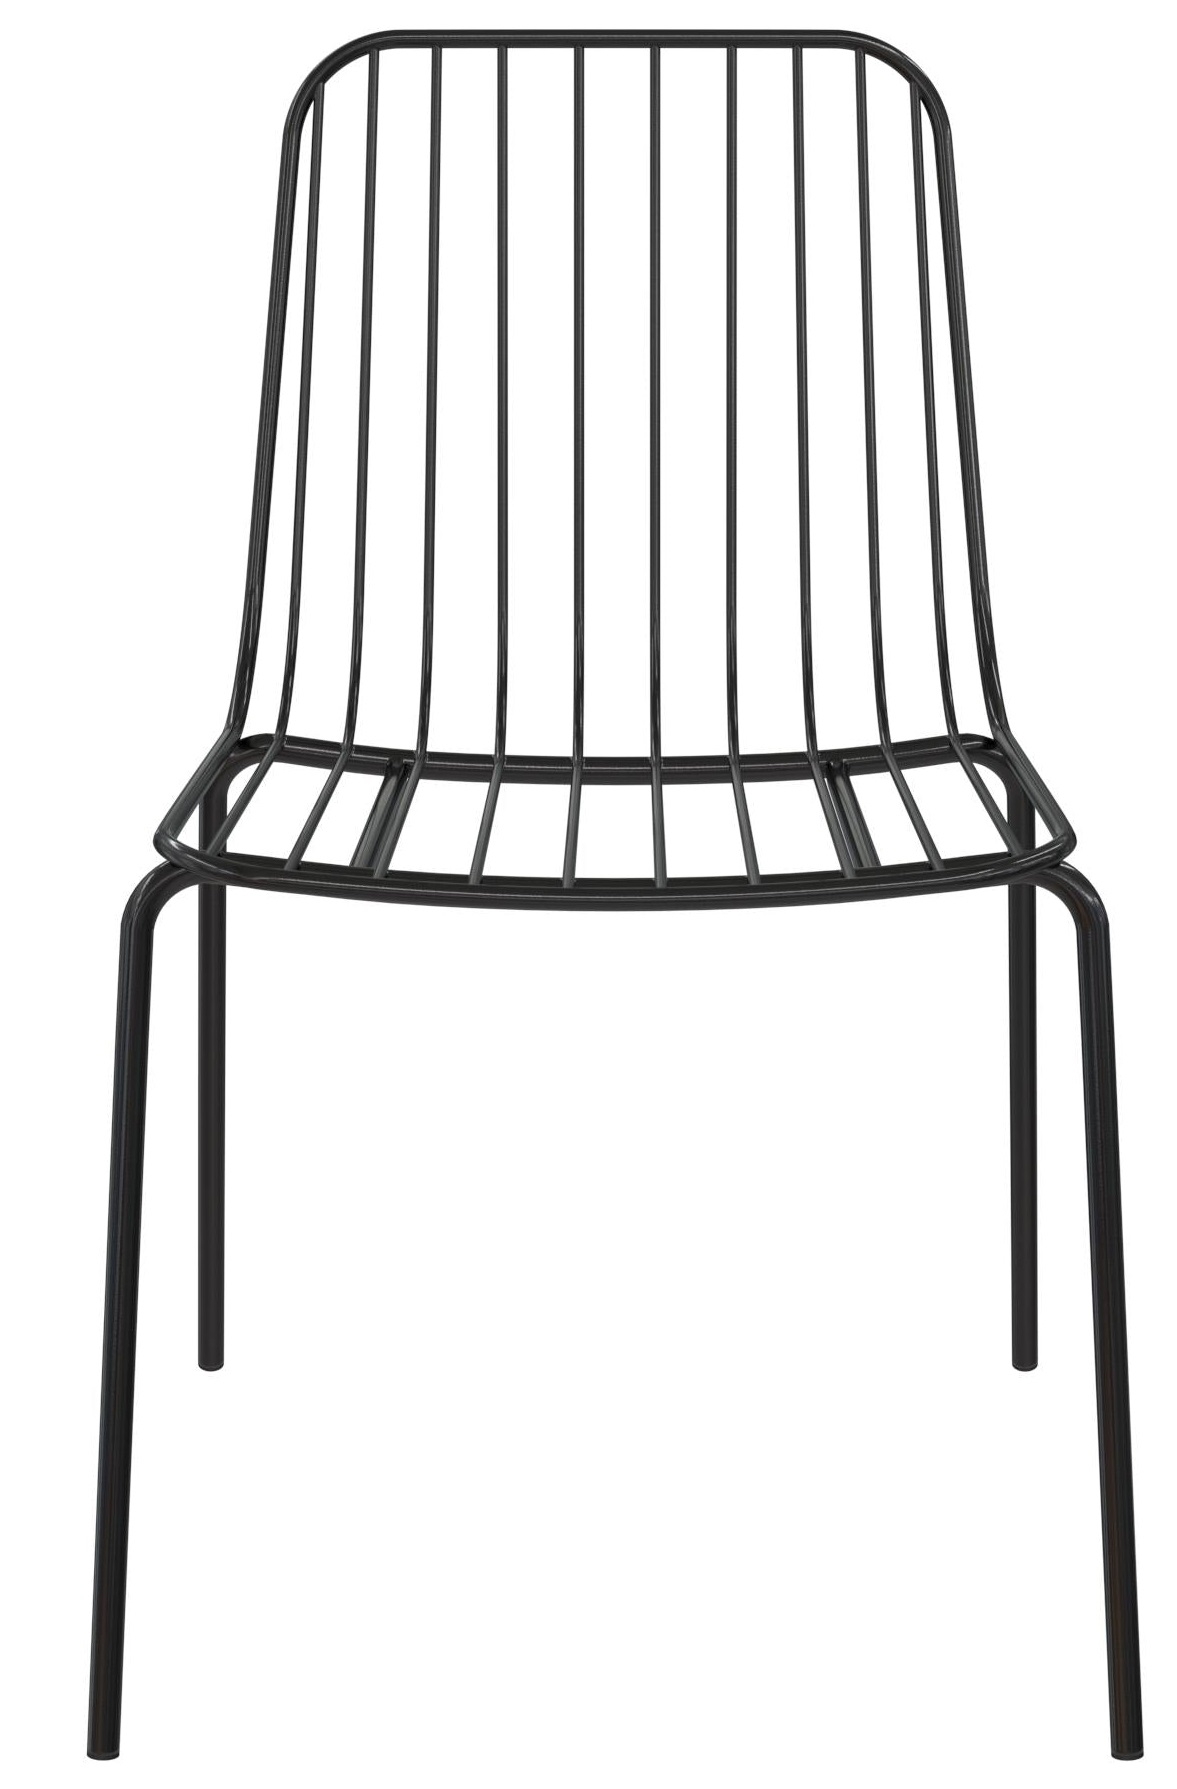 Alphason Caden Black Metal Wire Dining Chair Sold In Pairs